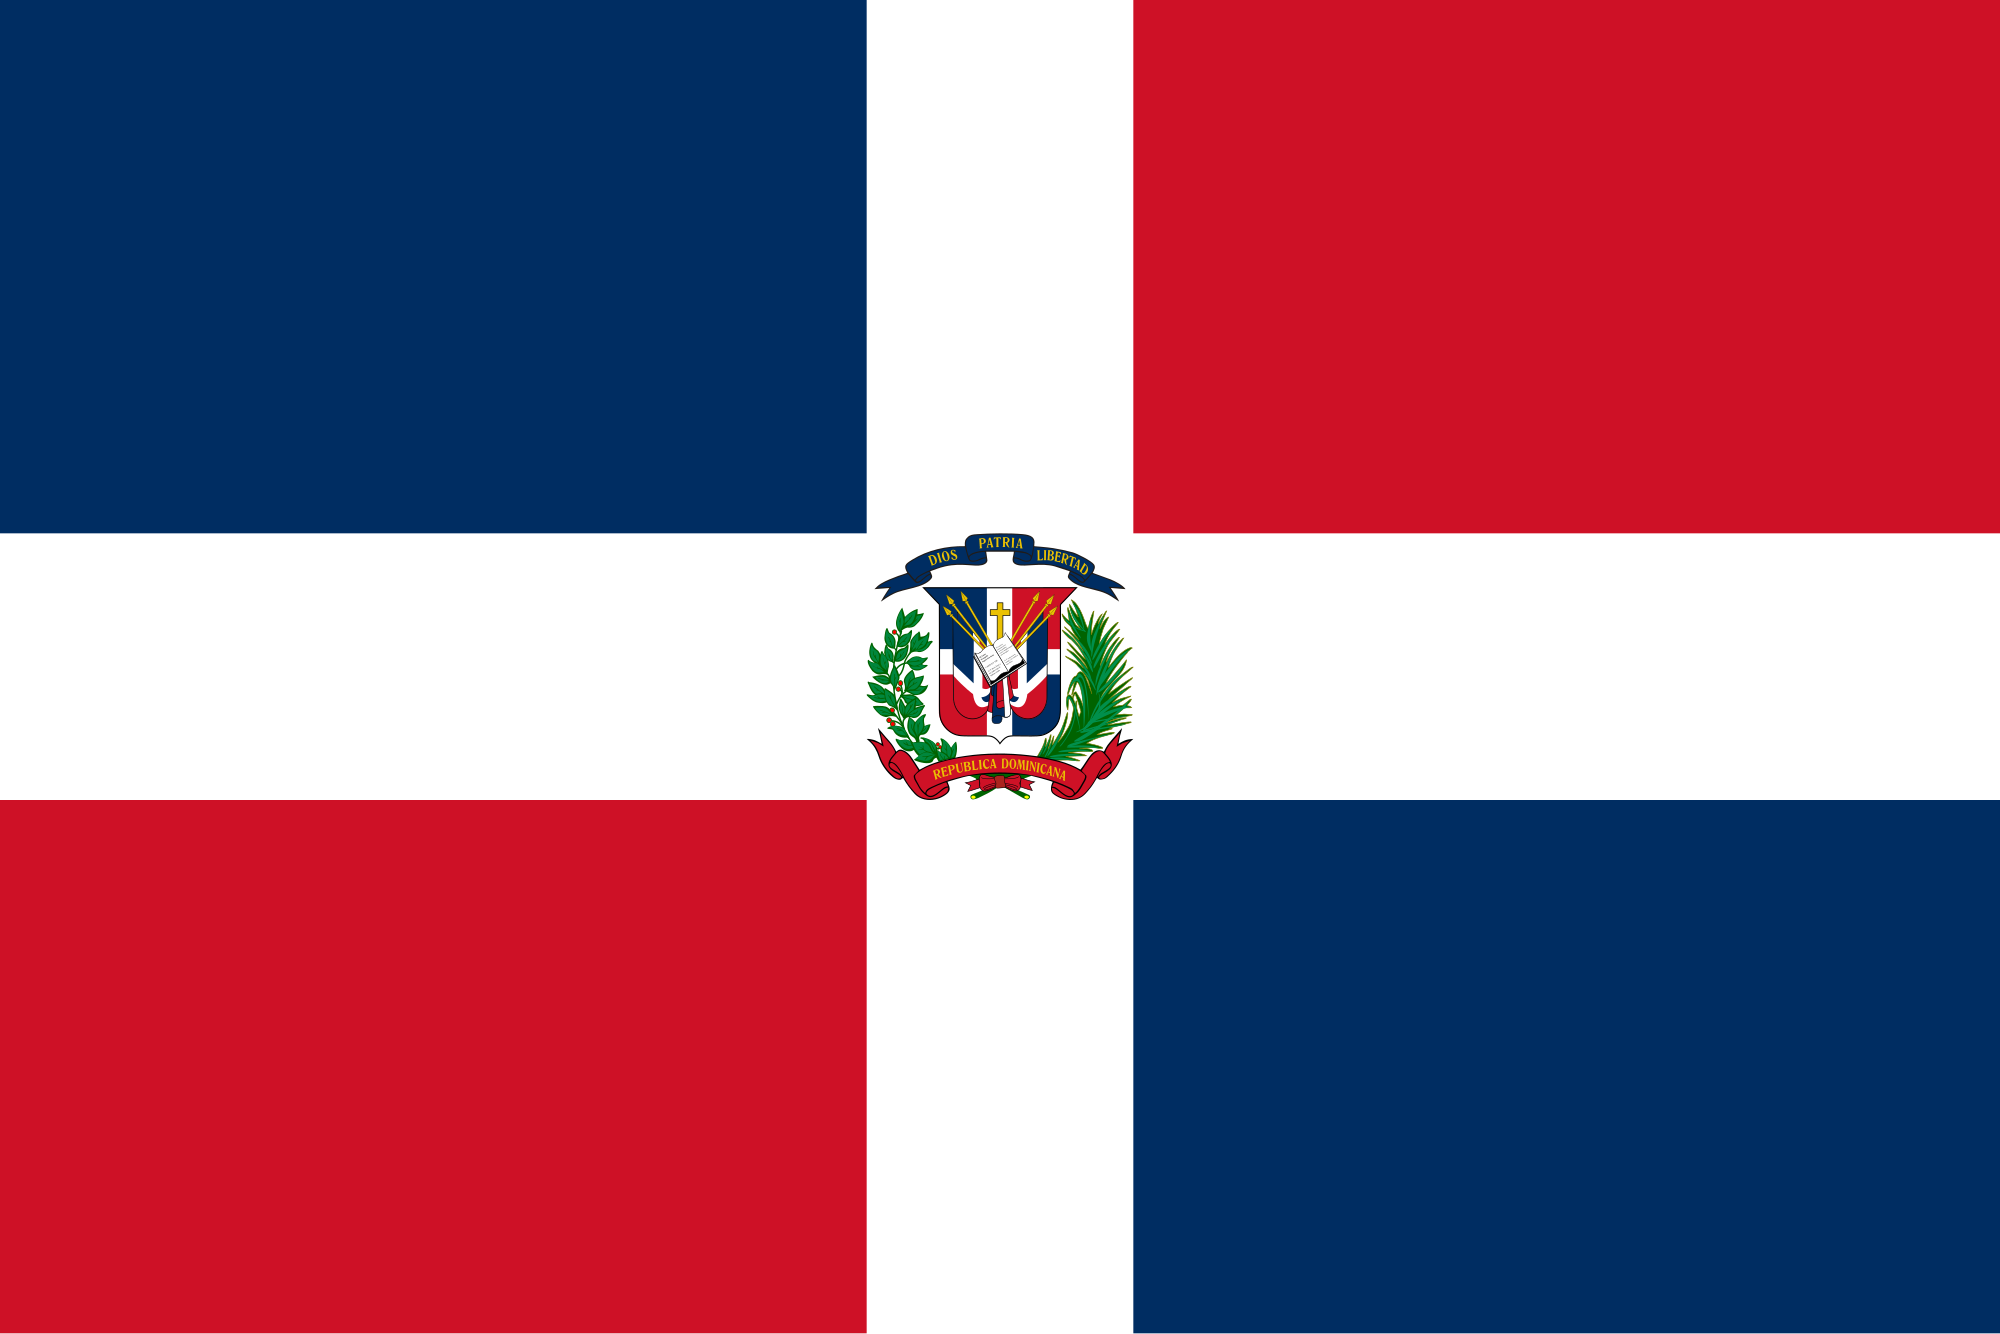 [Image: 2000px-Flag_of_the_Dominican_Republic.svg.png]